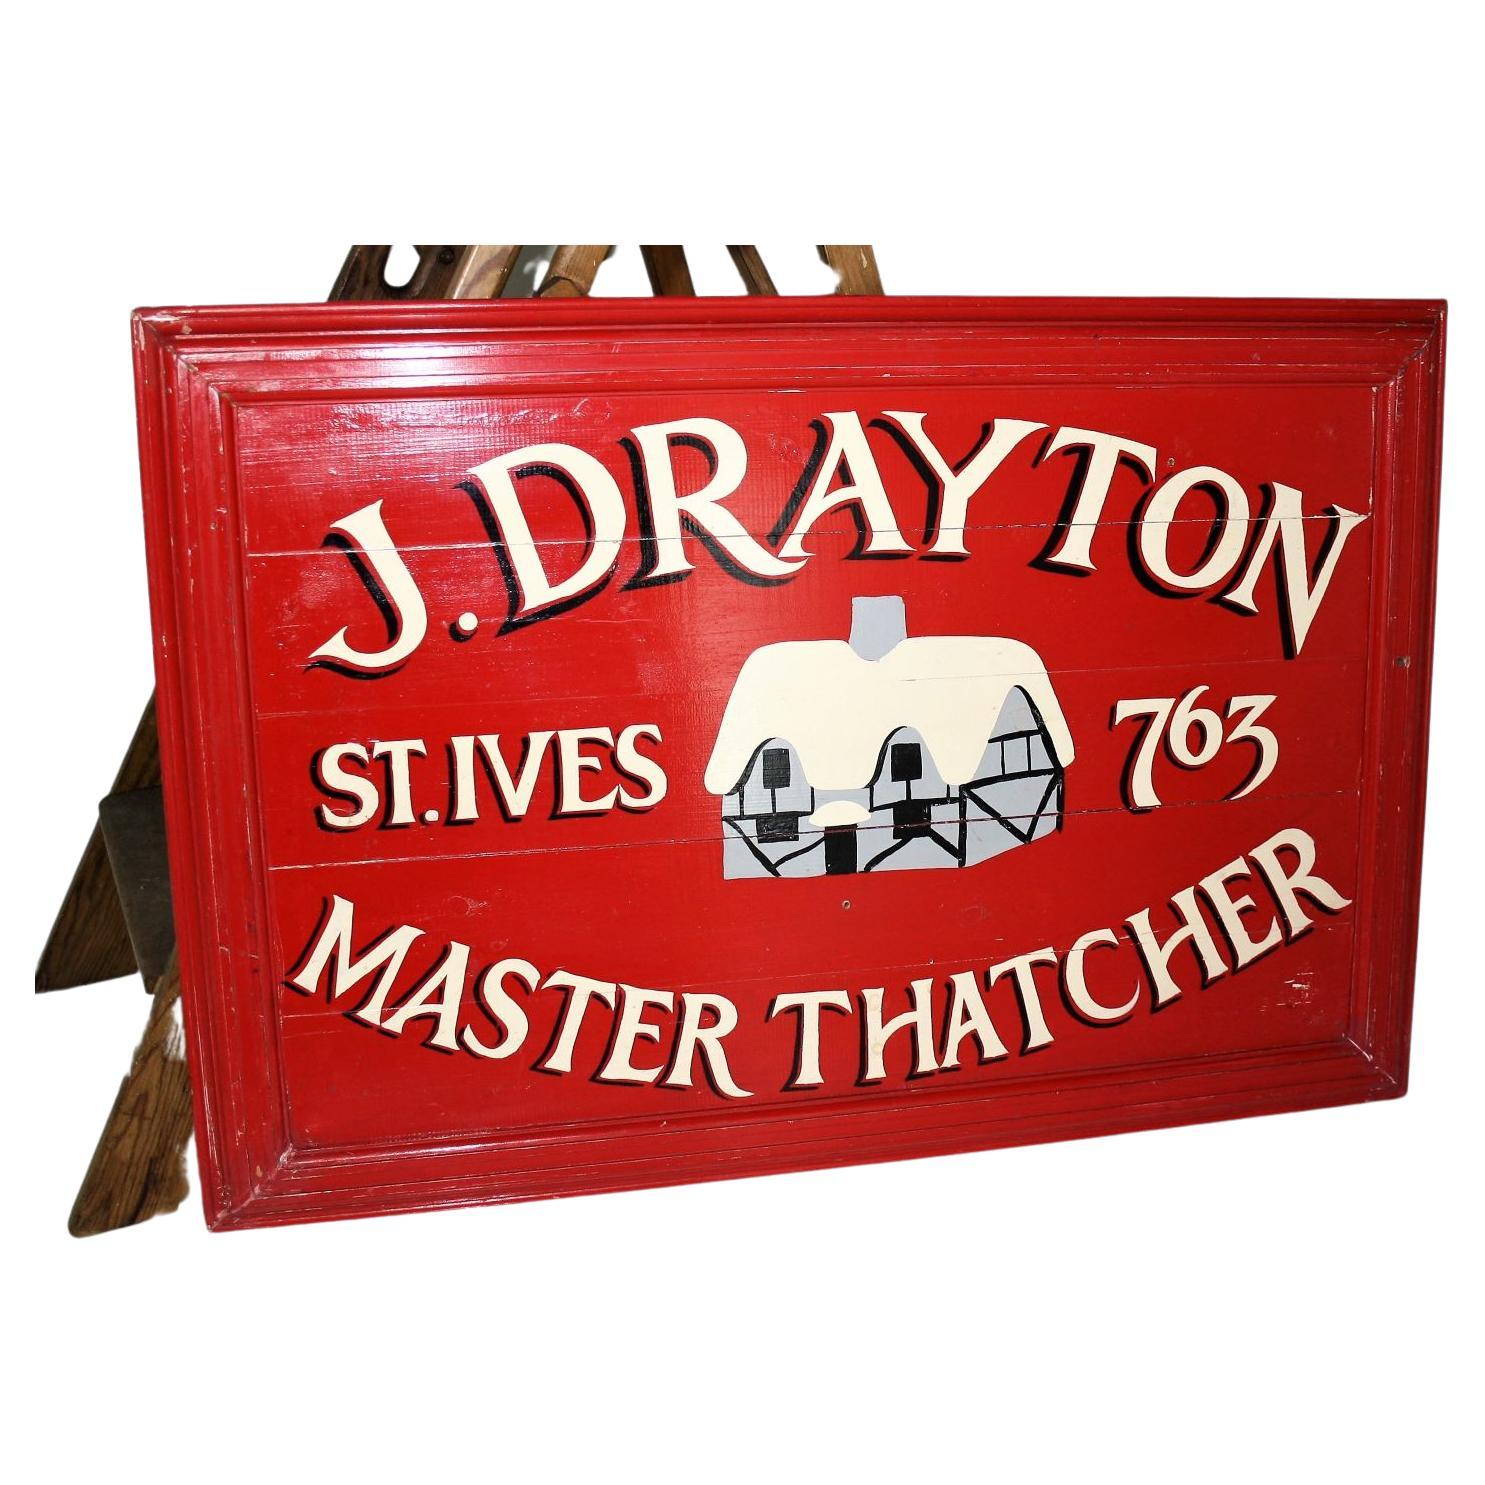 Large Old Hand Painted Wooden Sign for J.Drayton St Ives Cornwall England For Sale